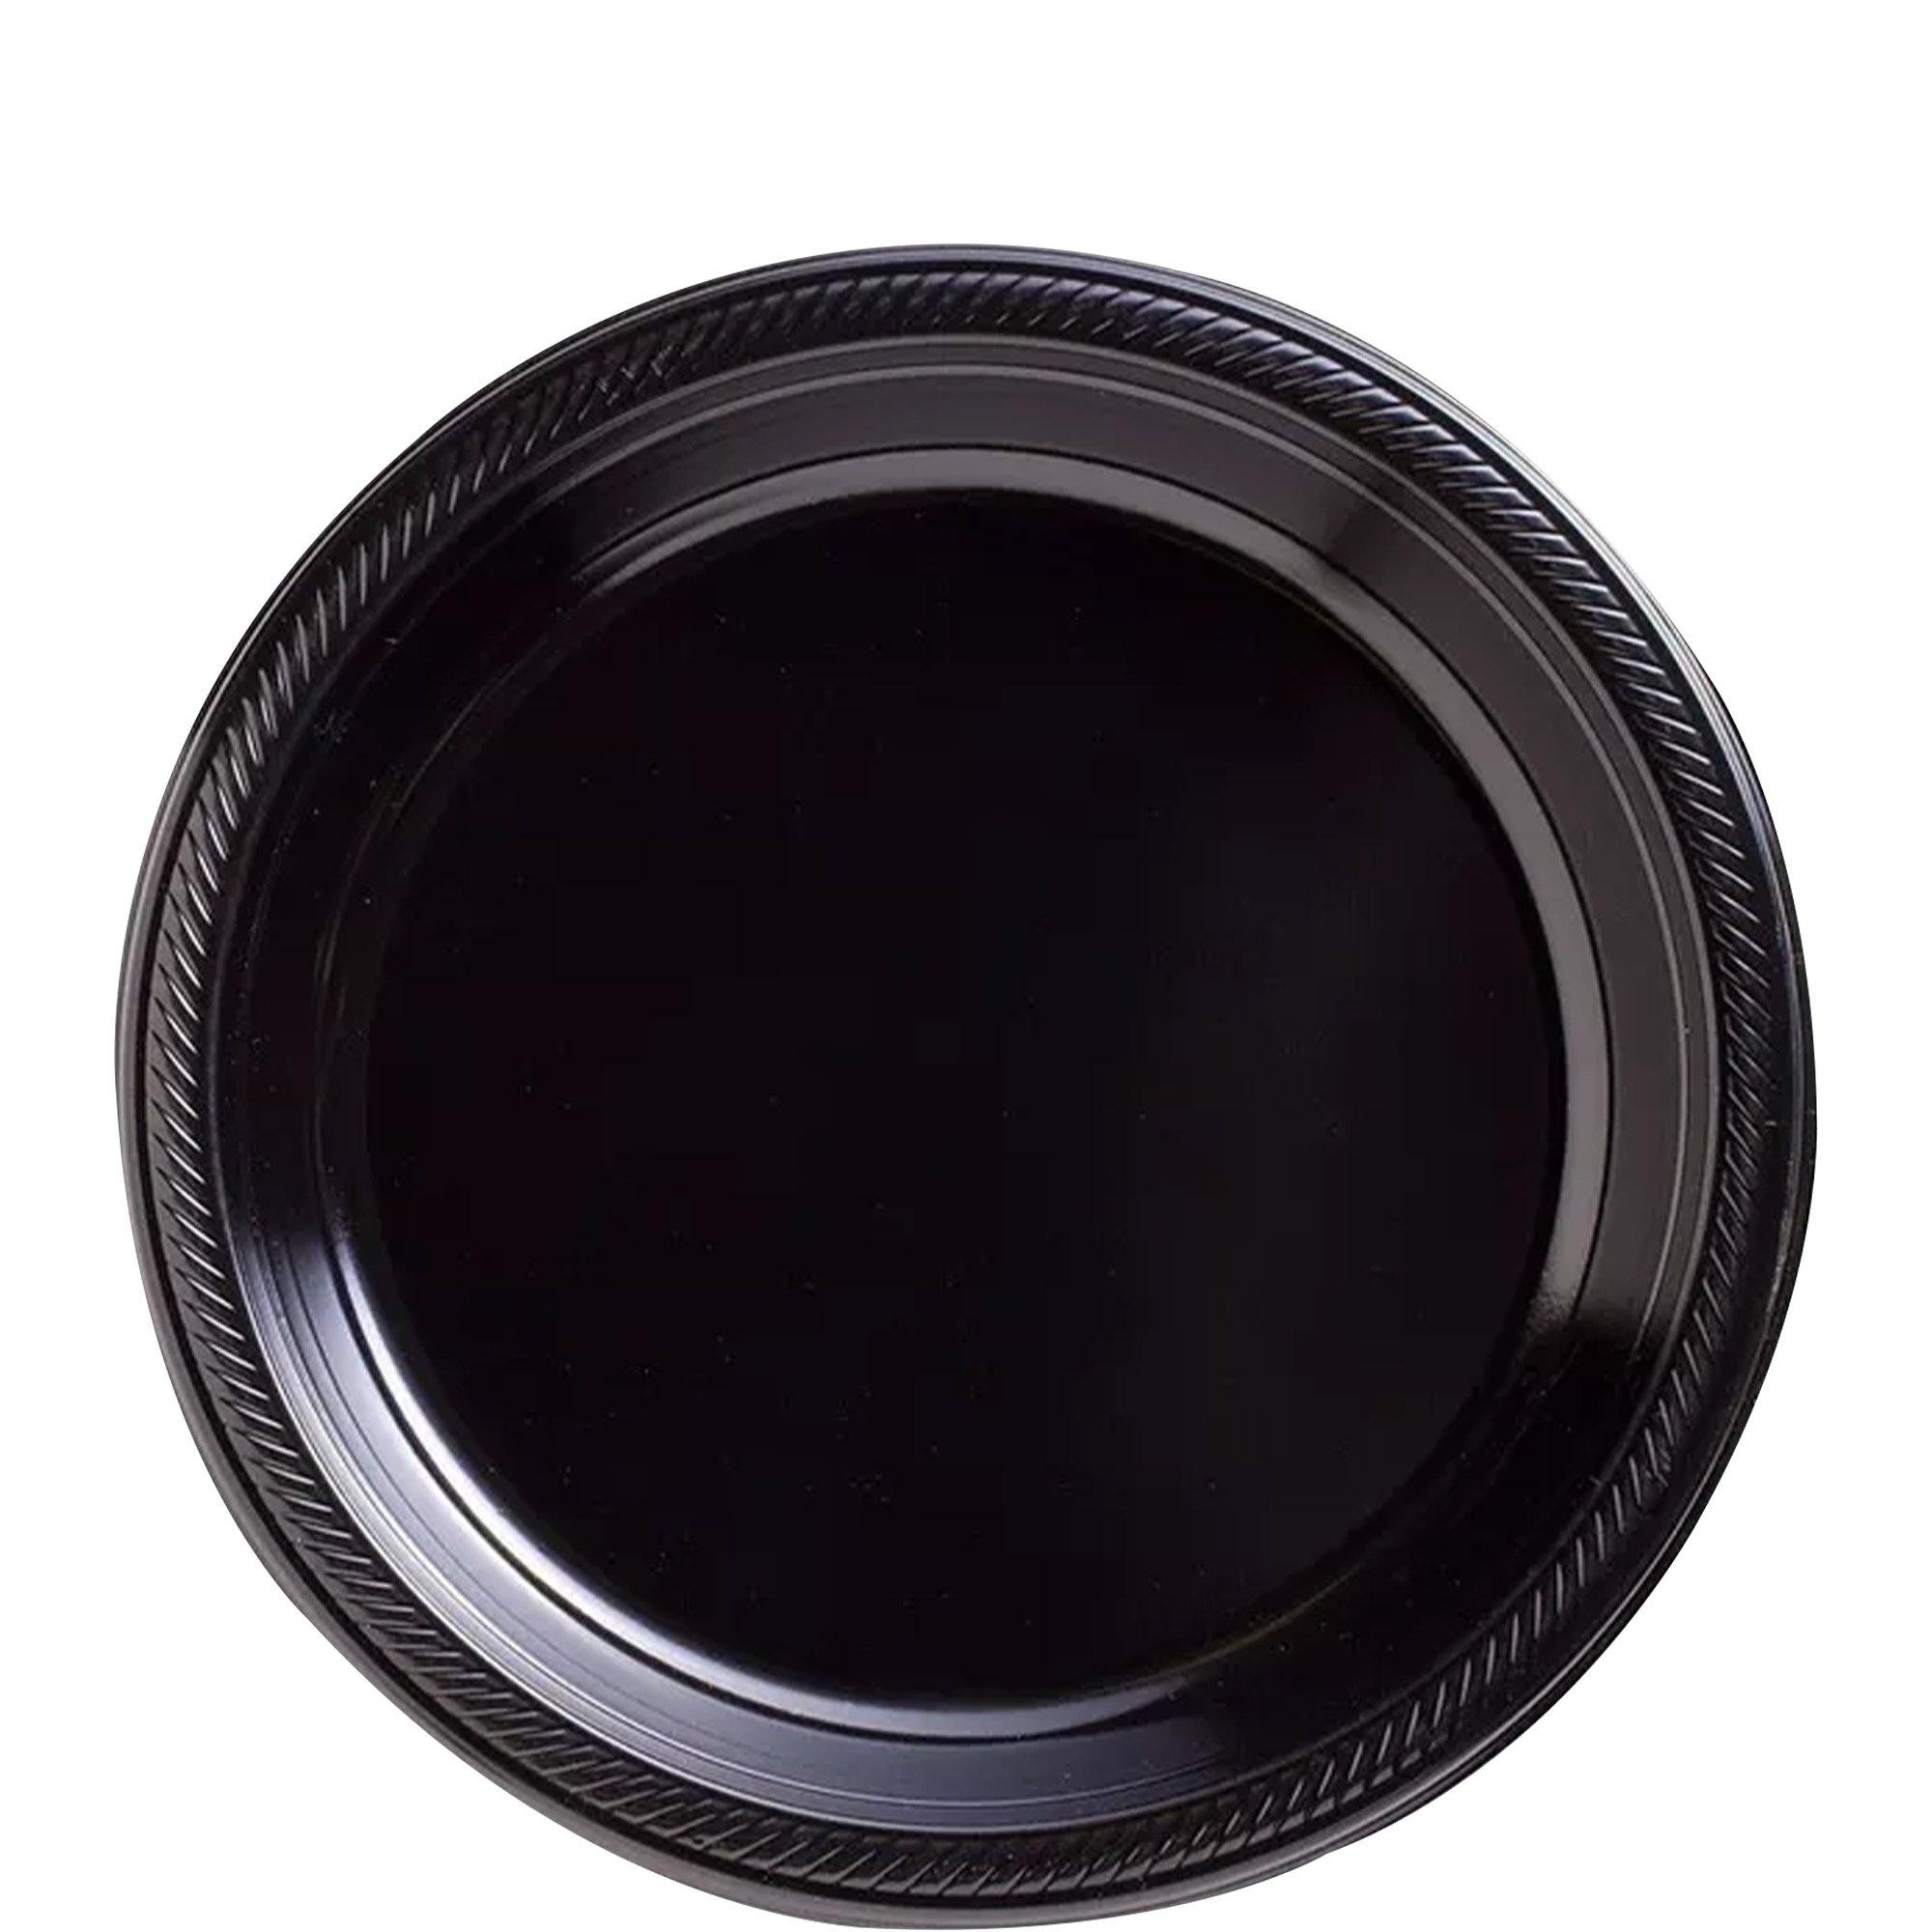 Disposable Plastic Plates Black, 7 Inches Plastic Dessert Plates, Strong  and Sturdy Disposable Plates for Party, Dinner, Holiday, Picnic, or Travel